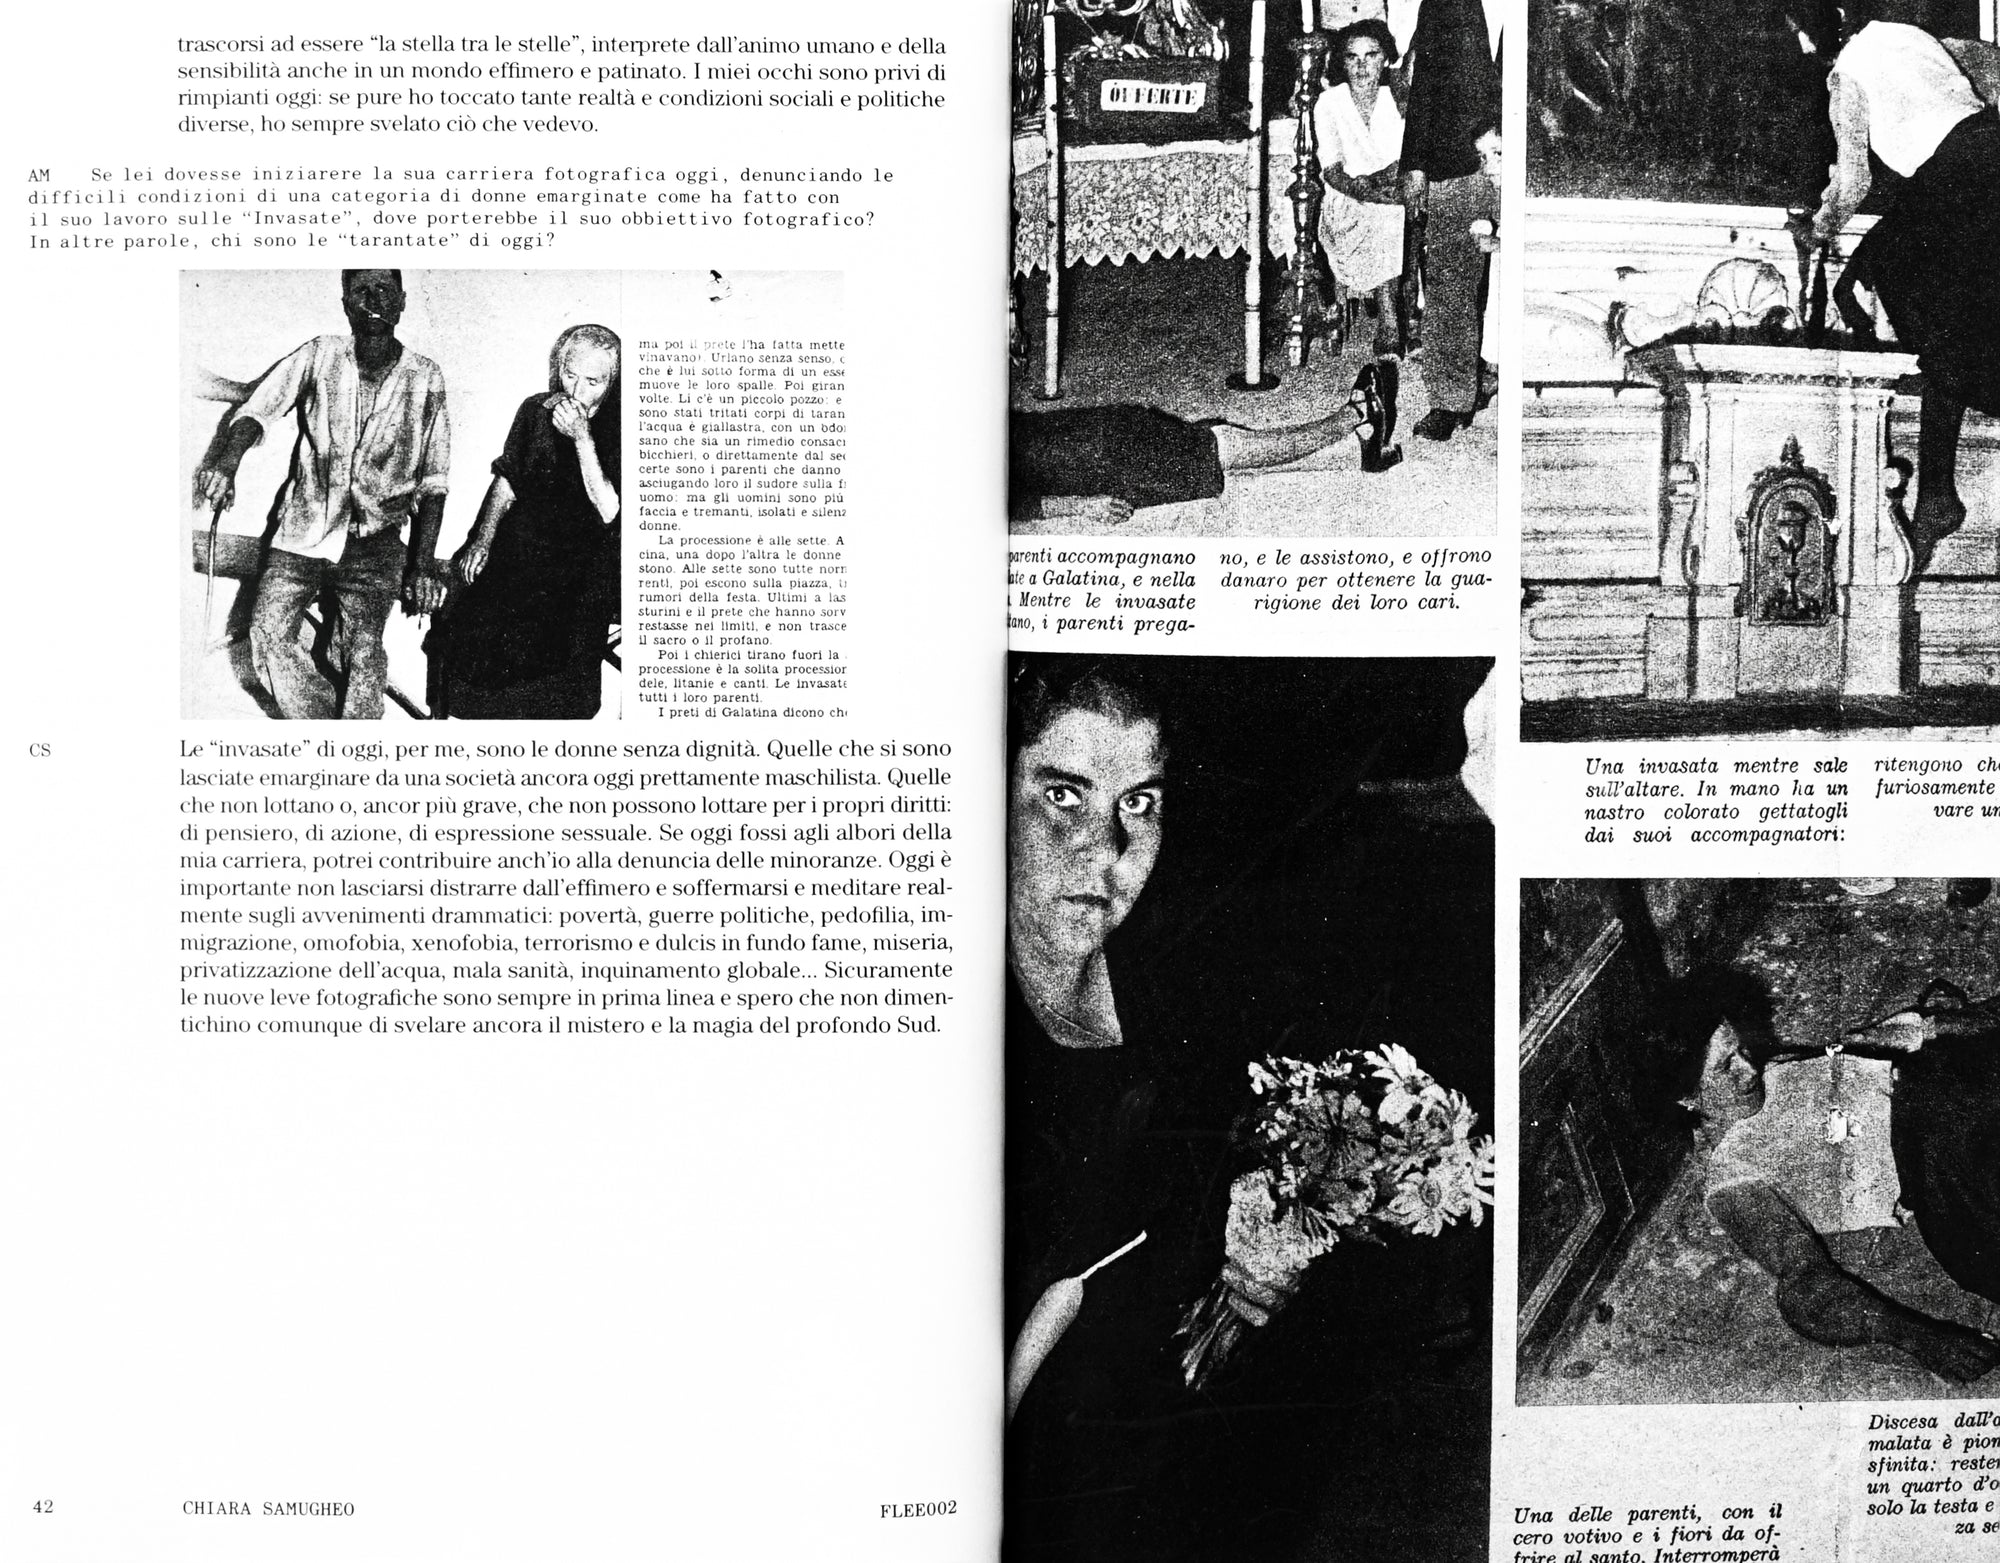 Black textt and photocopied black and white photos from news clippings